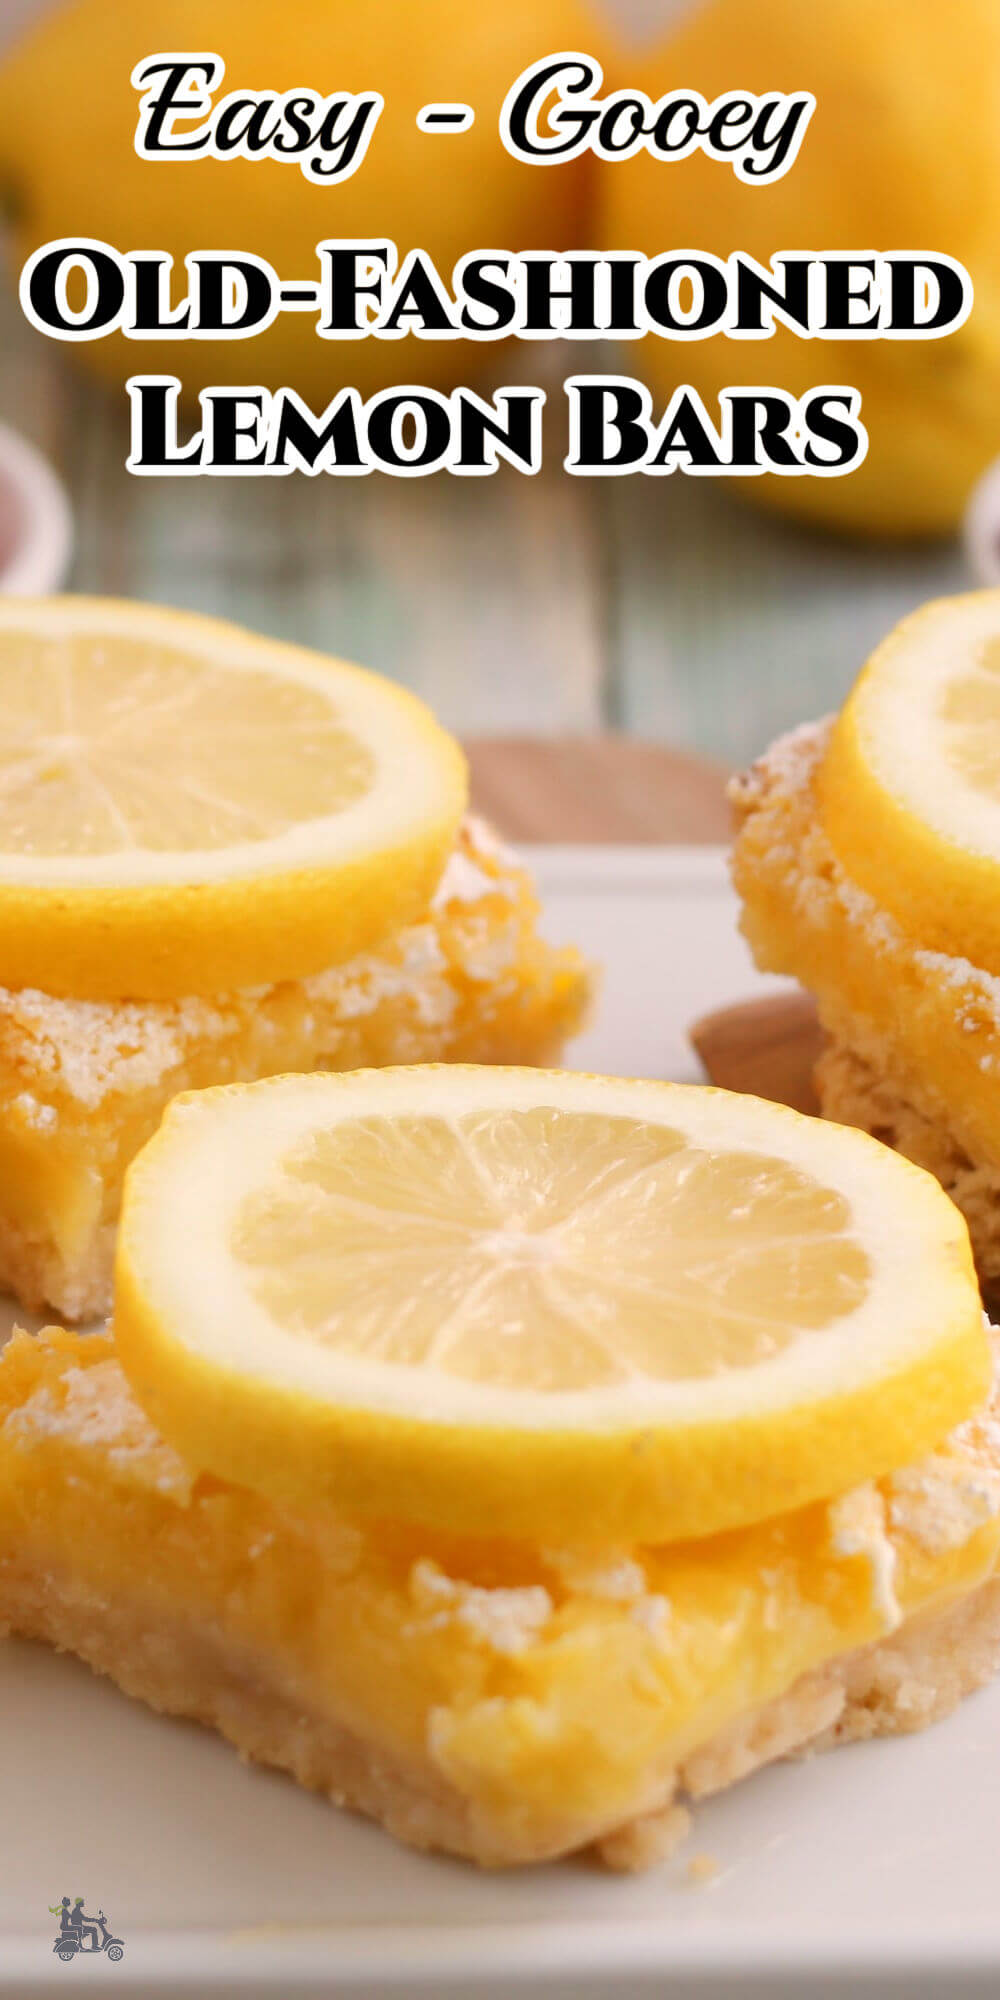 Old Fashioned Easy Lemon Bars are a classic dessert that tastes just like grandma used to make. If you are a simple dessert that brings back all your childhood memories then this is the recipe for you.